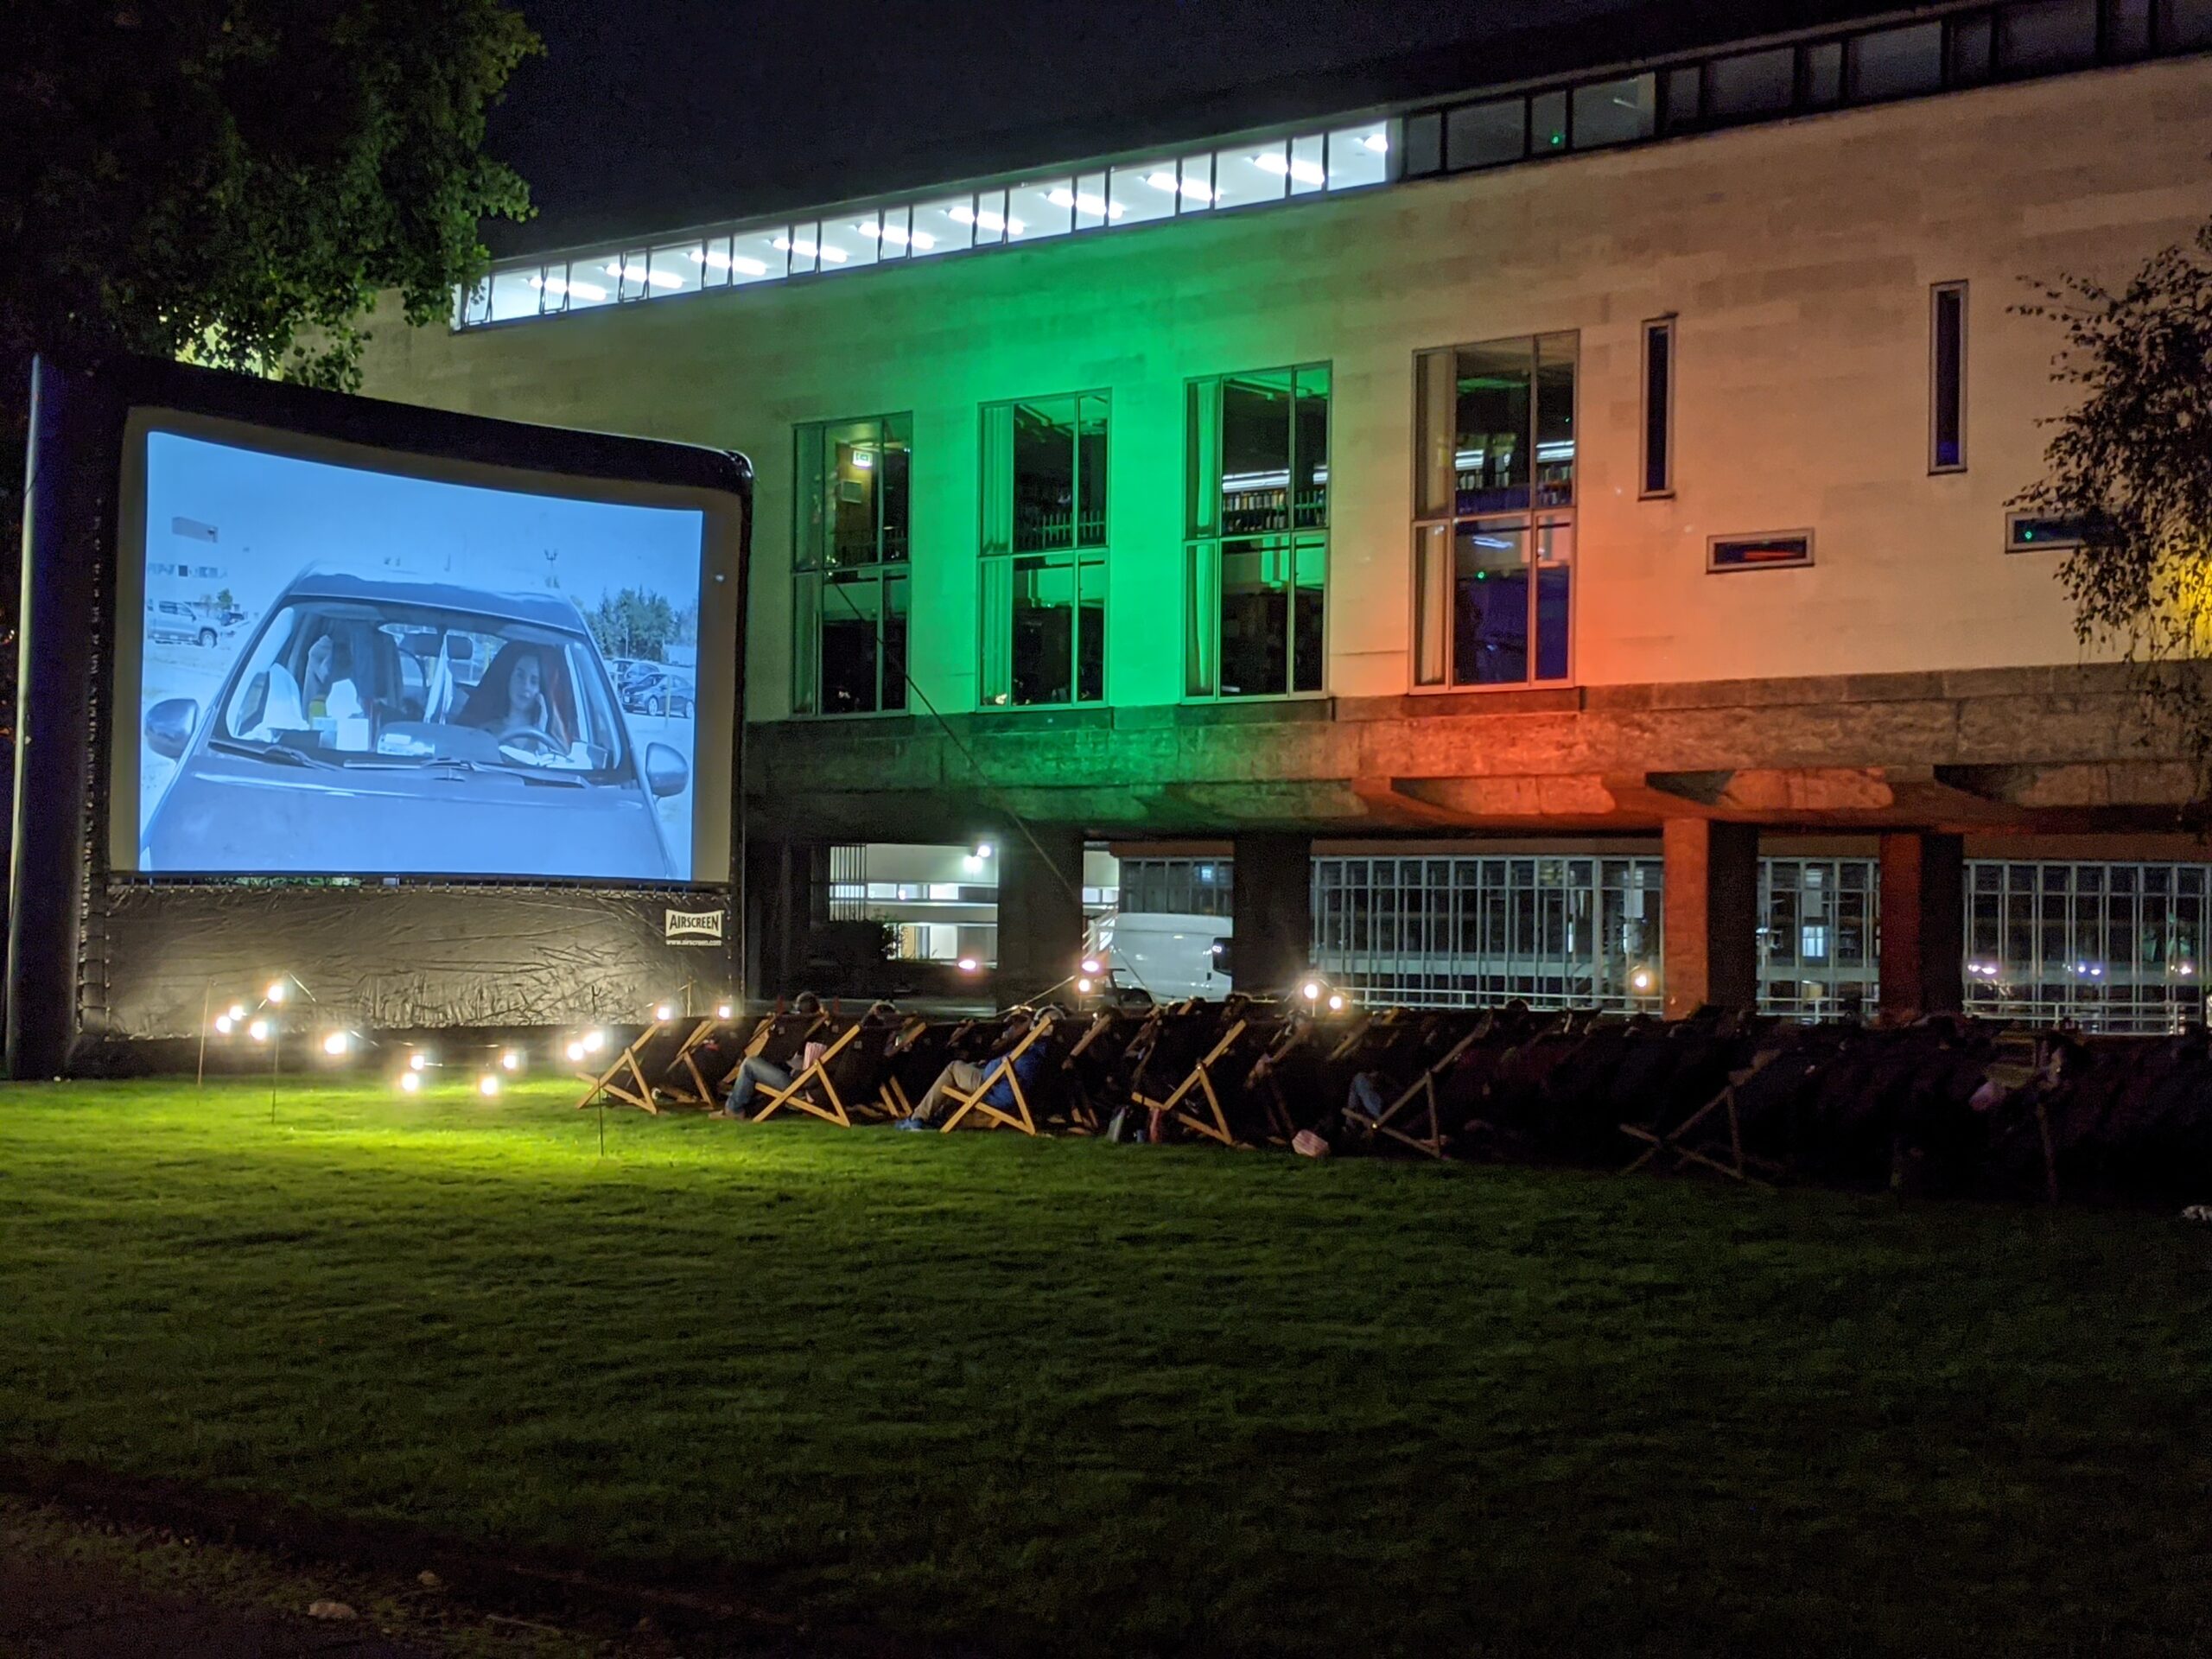 An image of deckchairs and a large screen at the CRASSH film festival.